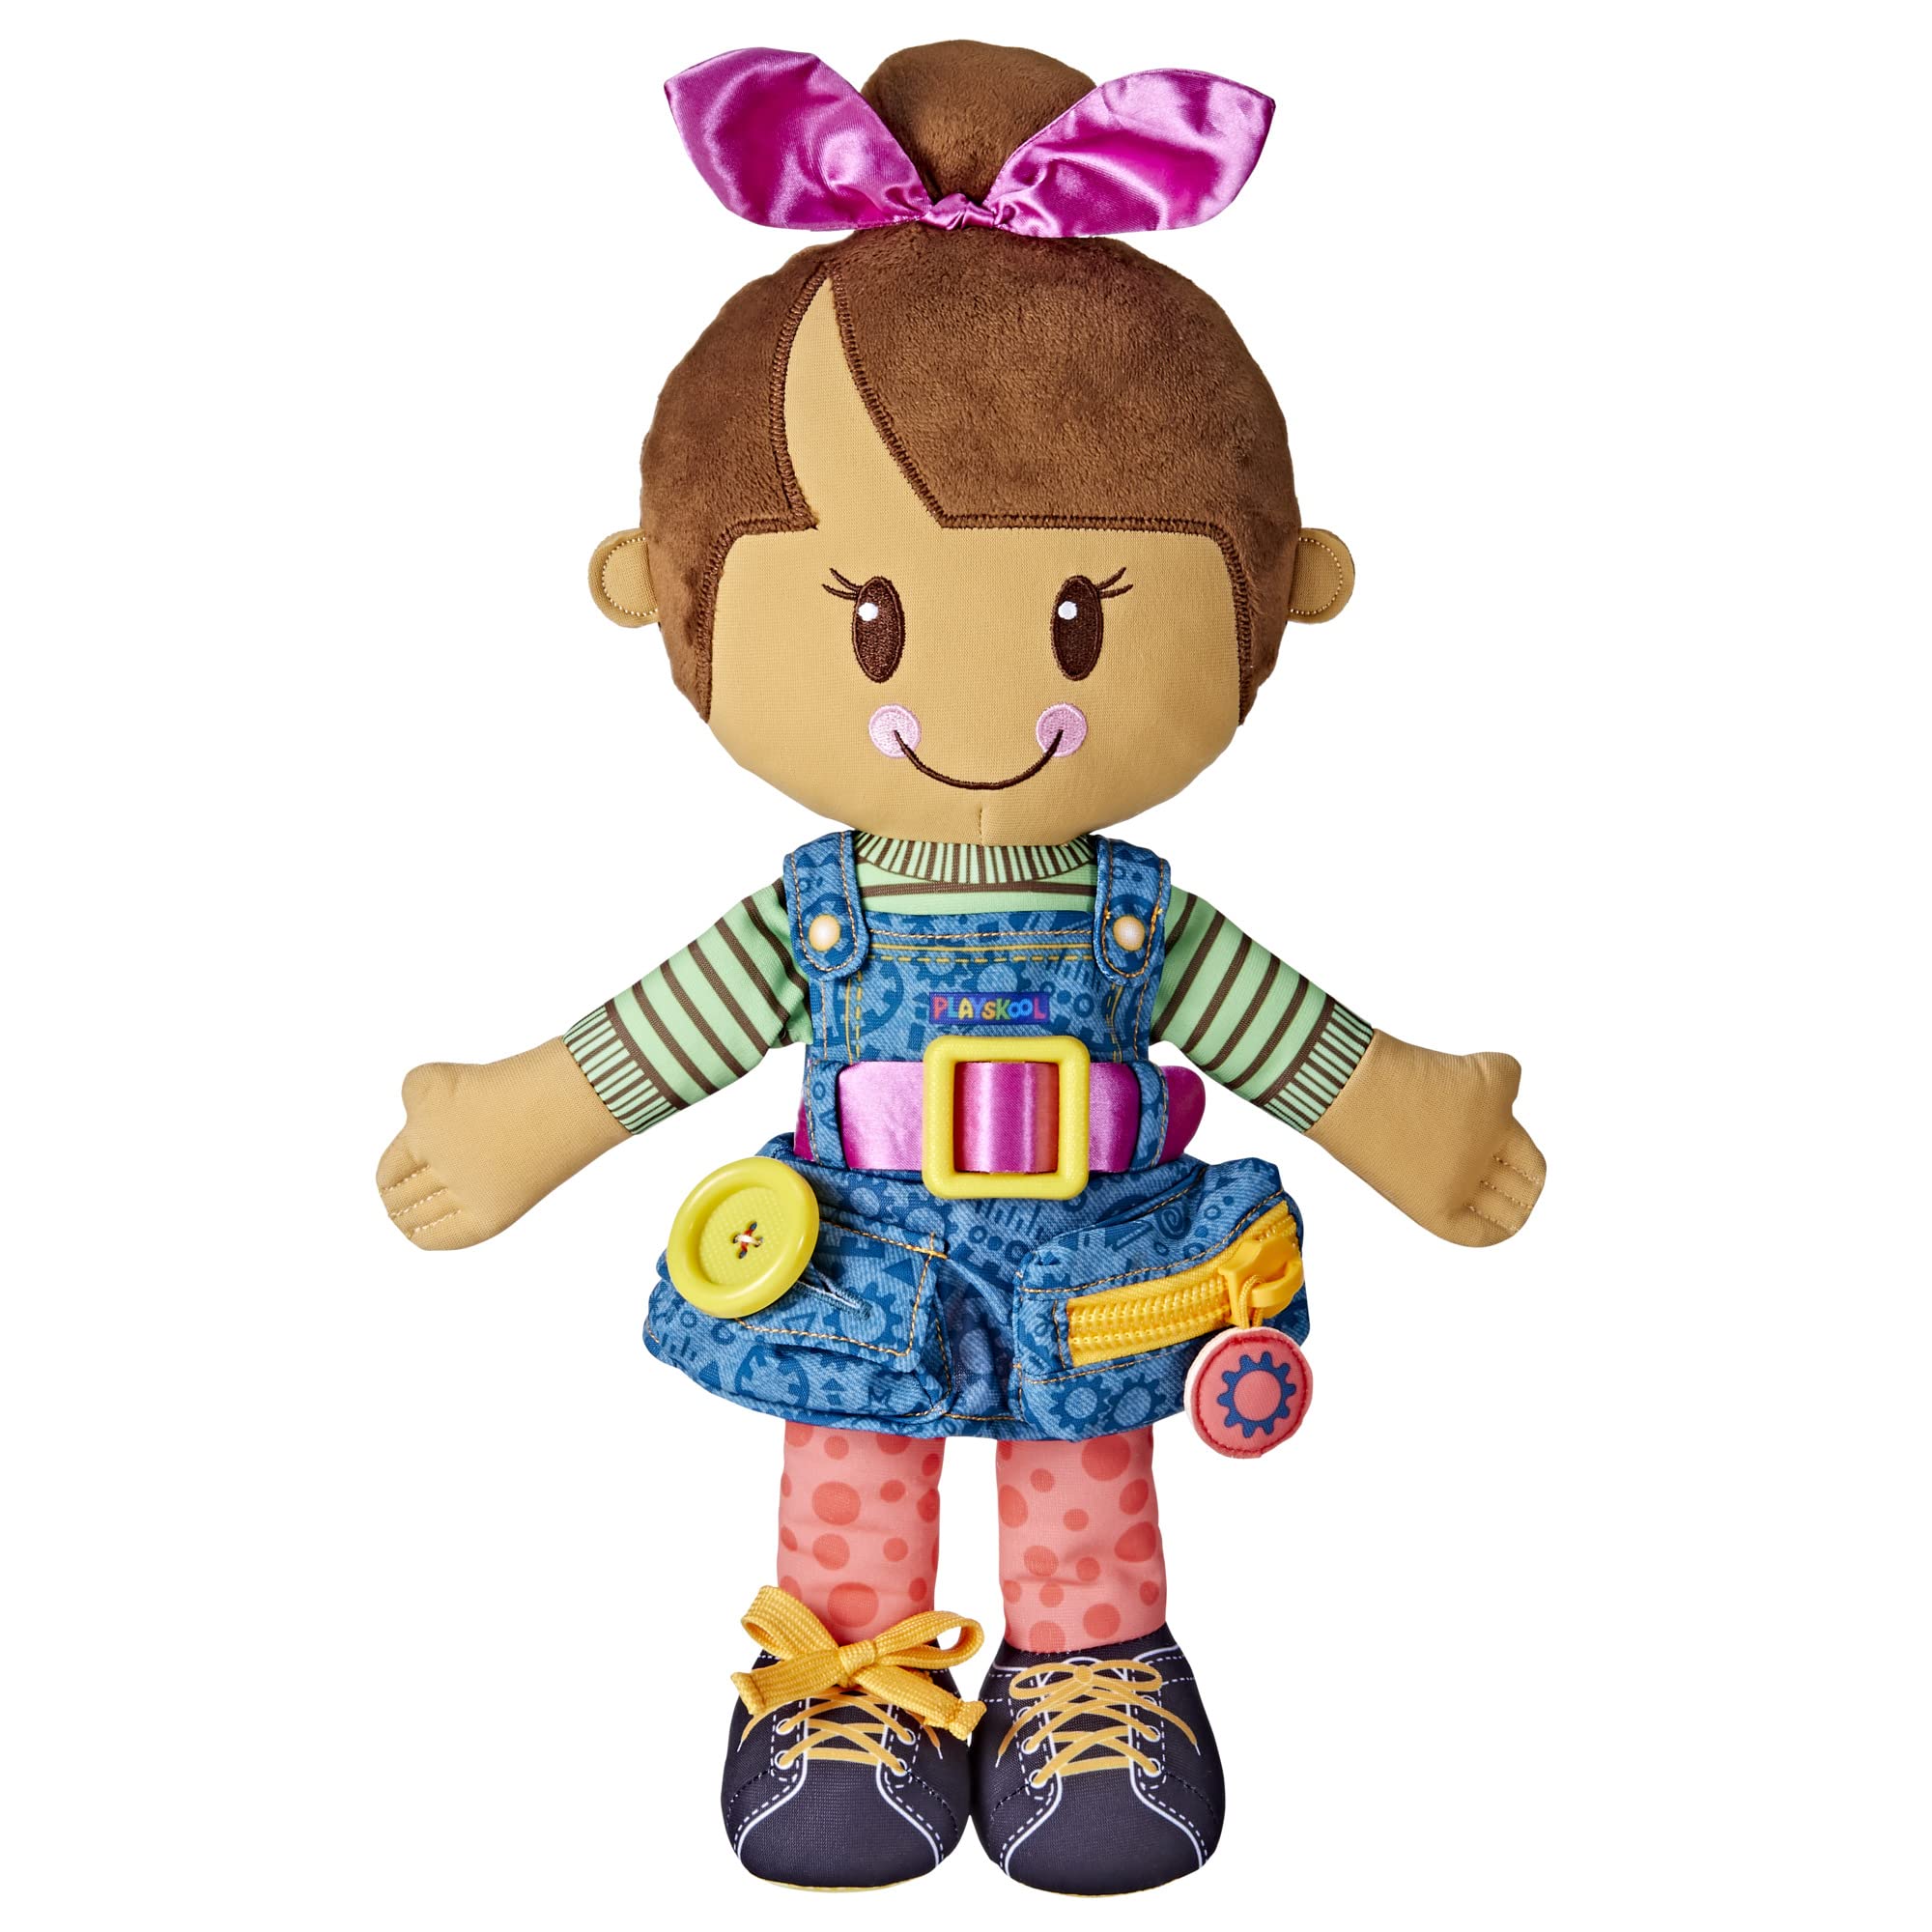 Playskool Dressy Kids Doll with Brown Hair and Bow, Activity Plush Toy with Zipper, Shoelace, Button, For Ages 2 and Up ( Exclus